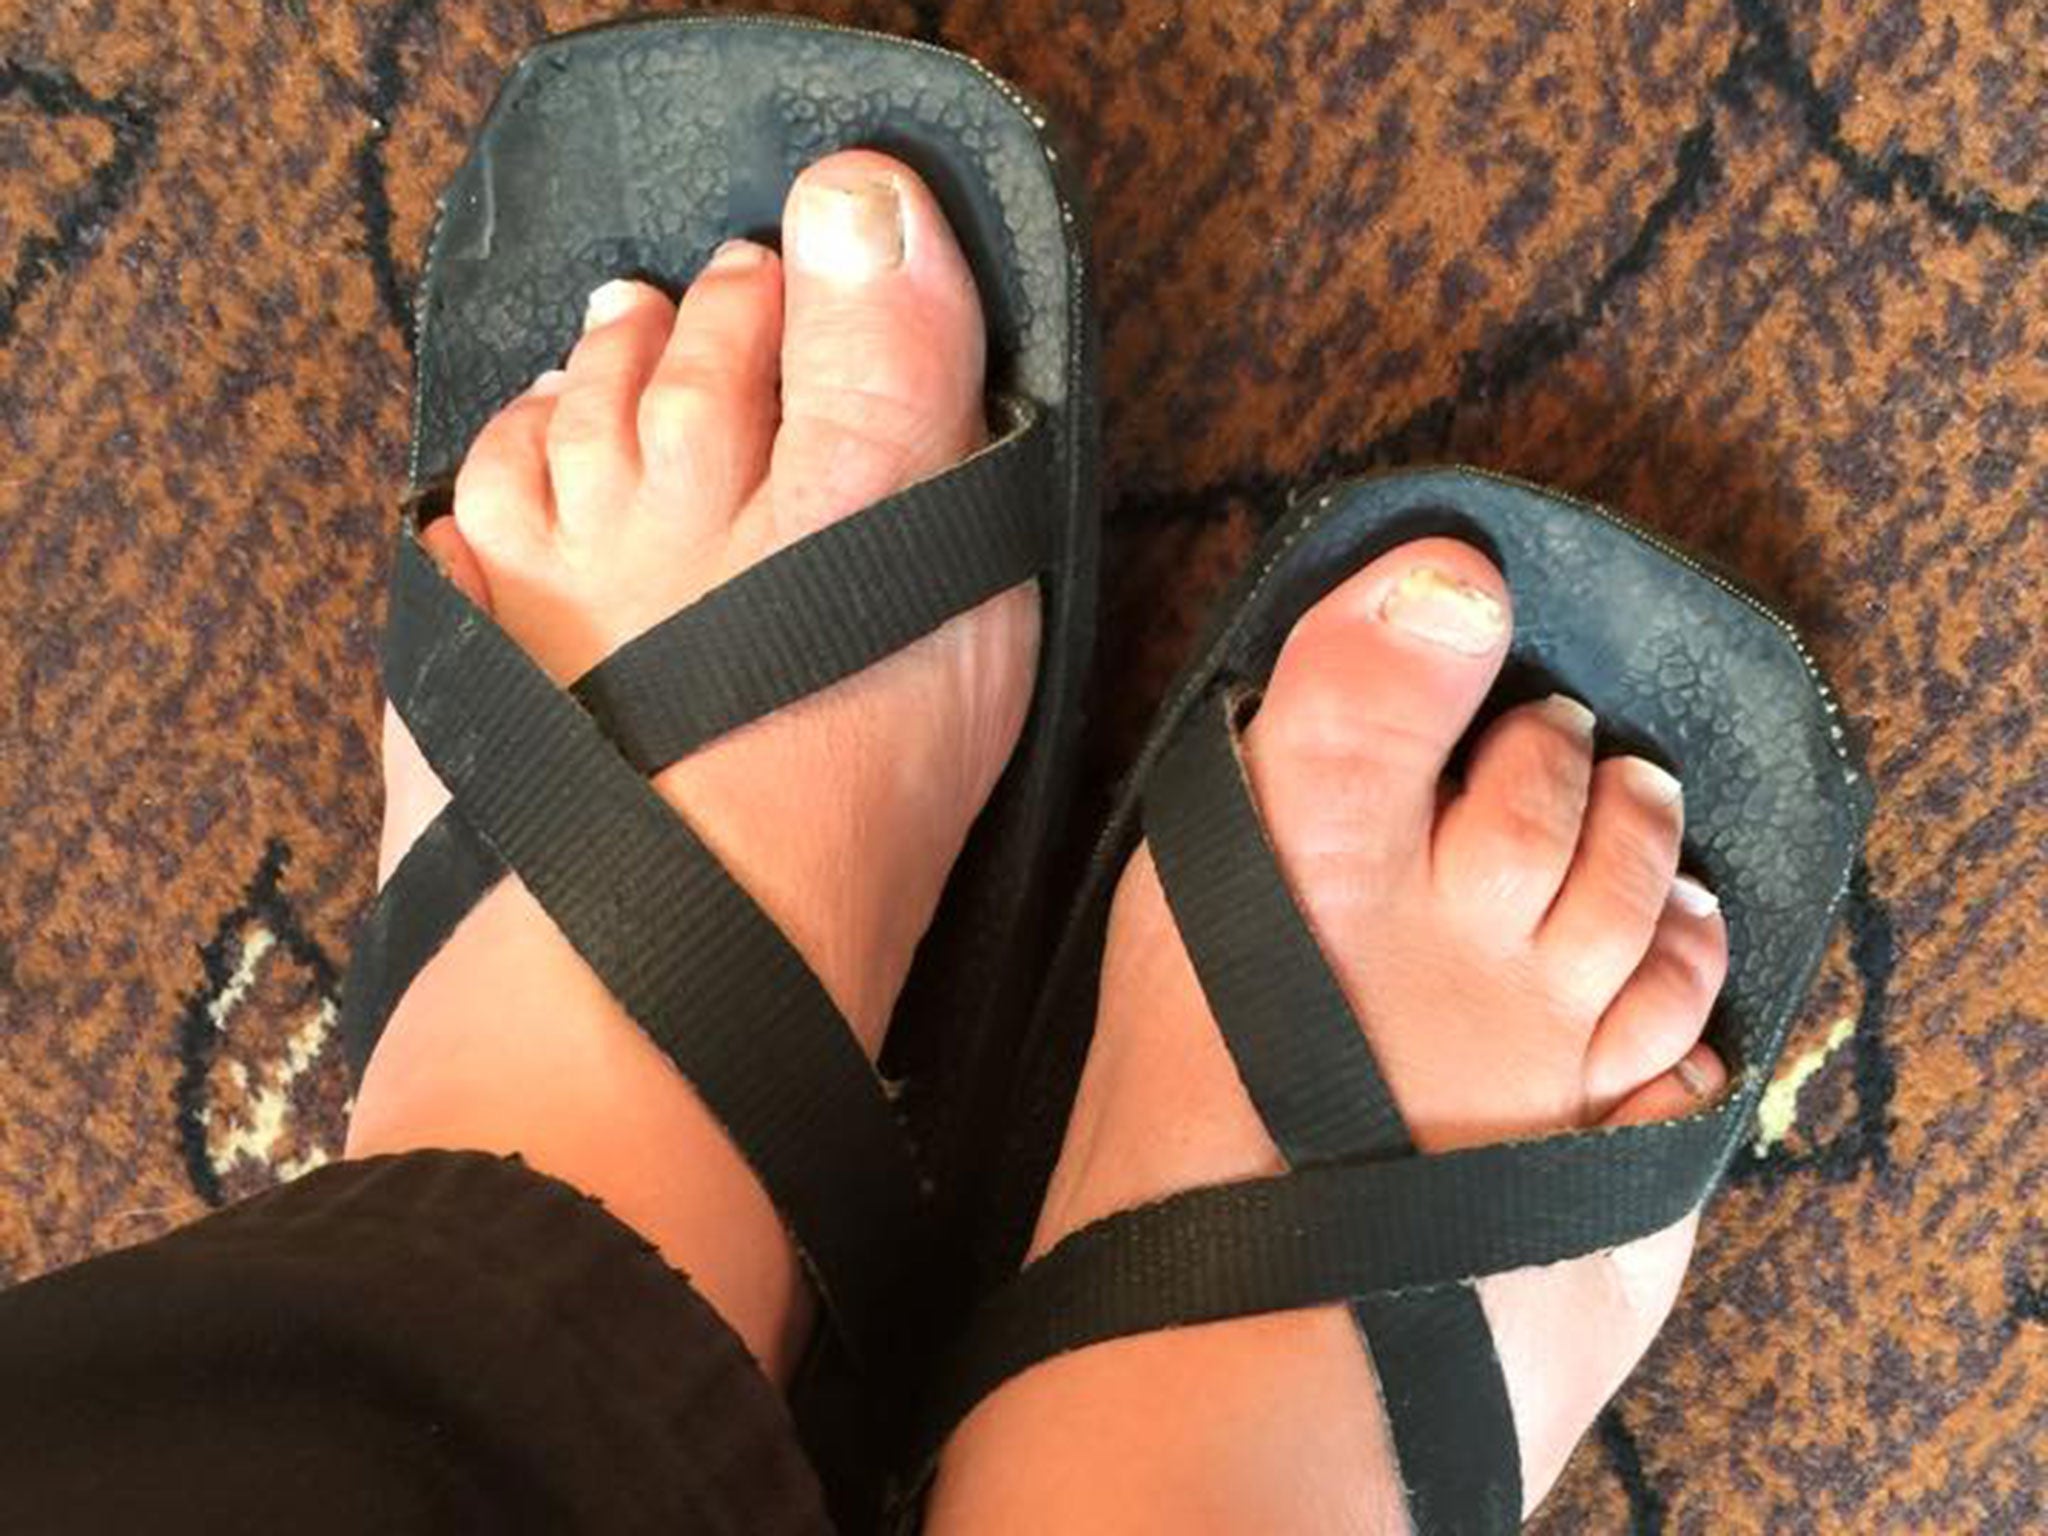 Sandals worn by Andrew Dotchin (Facebook/Andrew Dotchin)